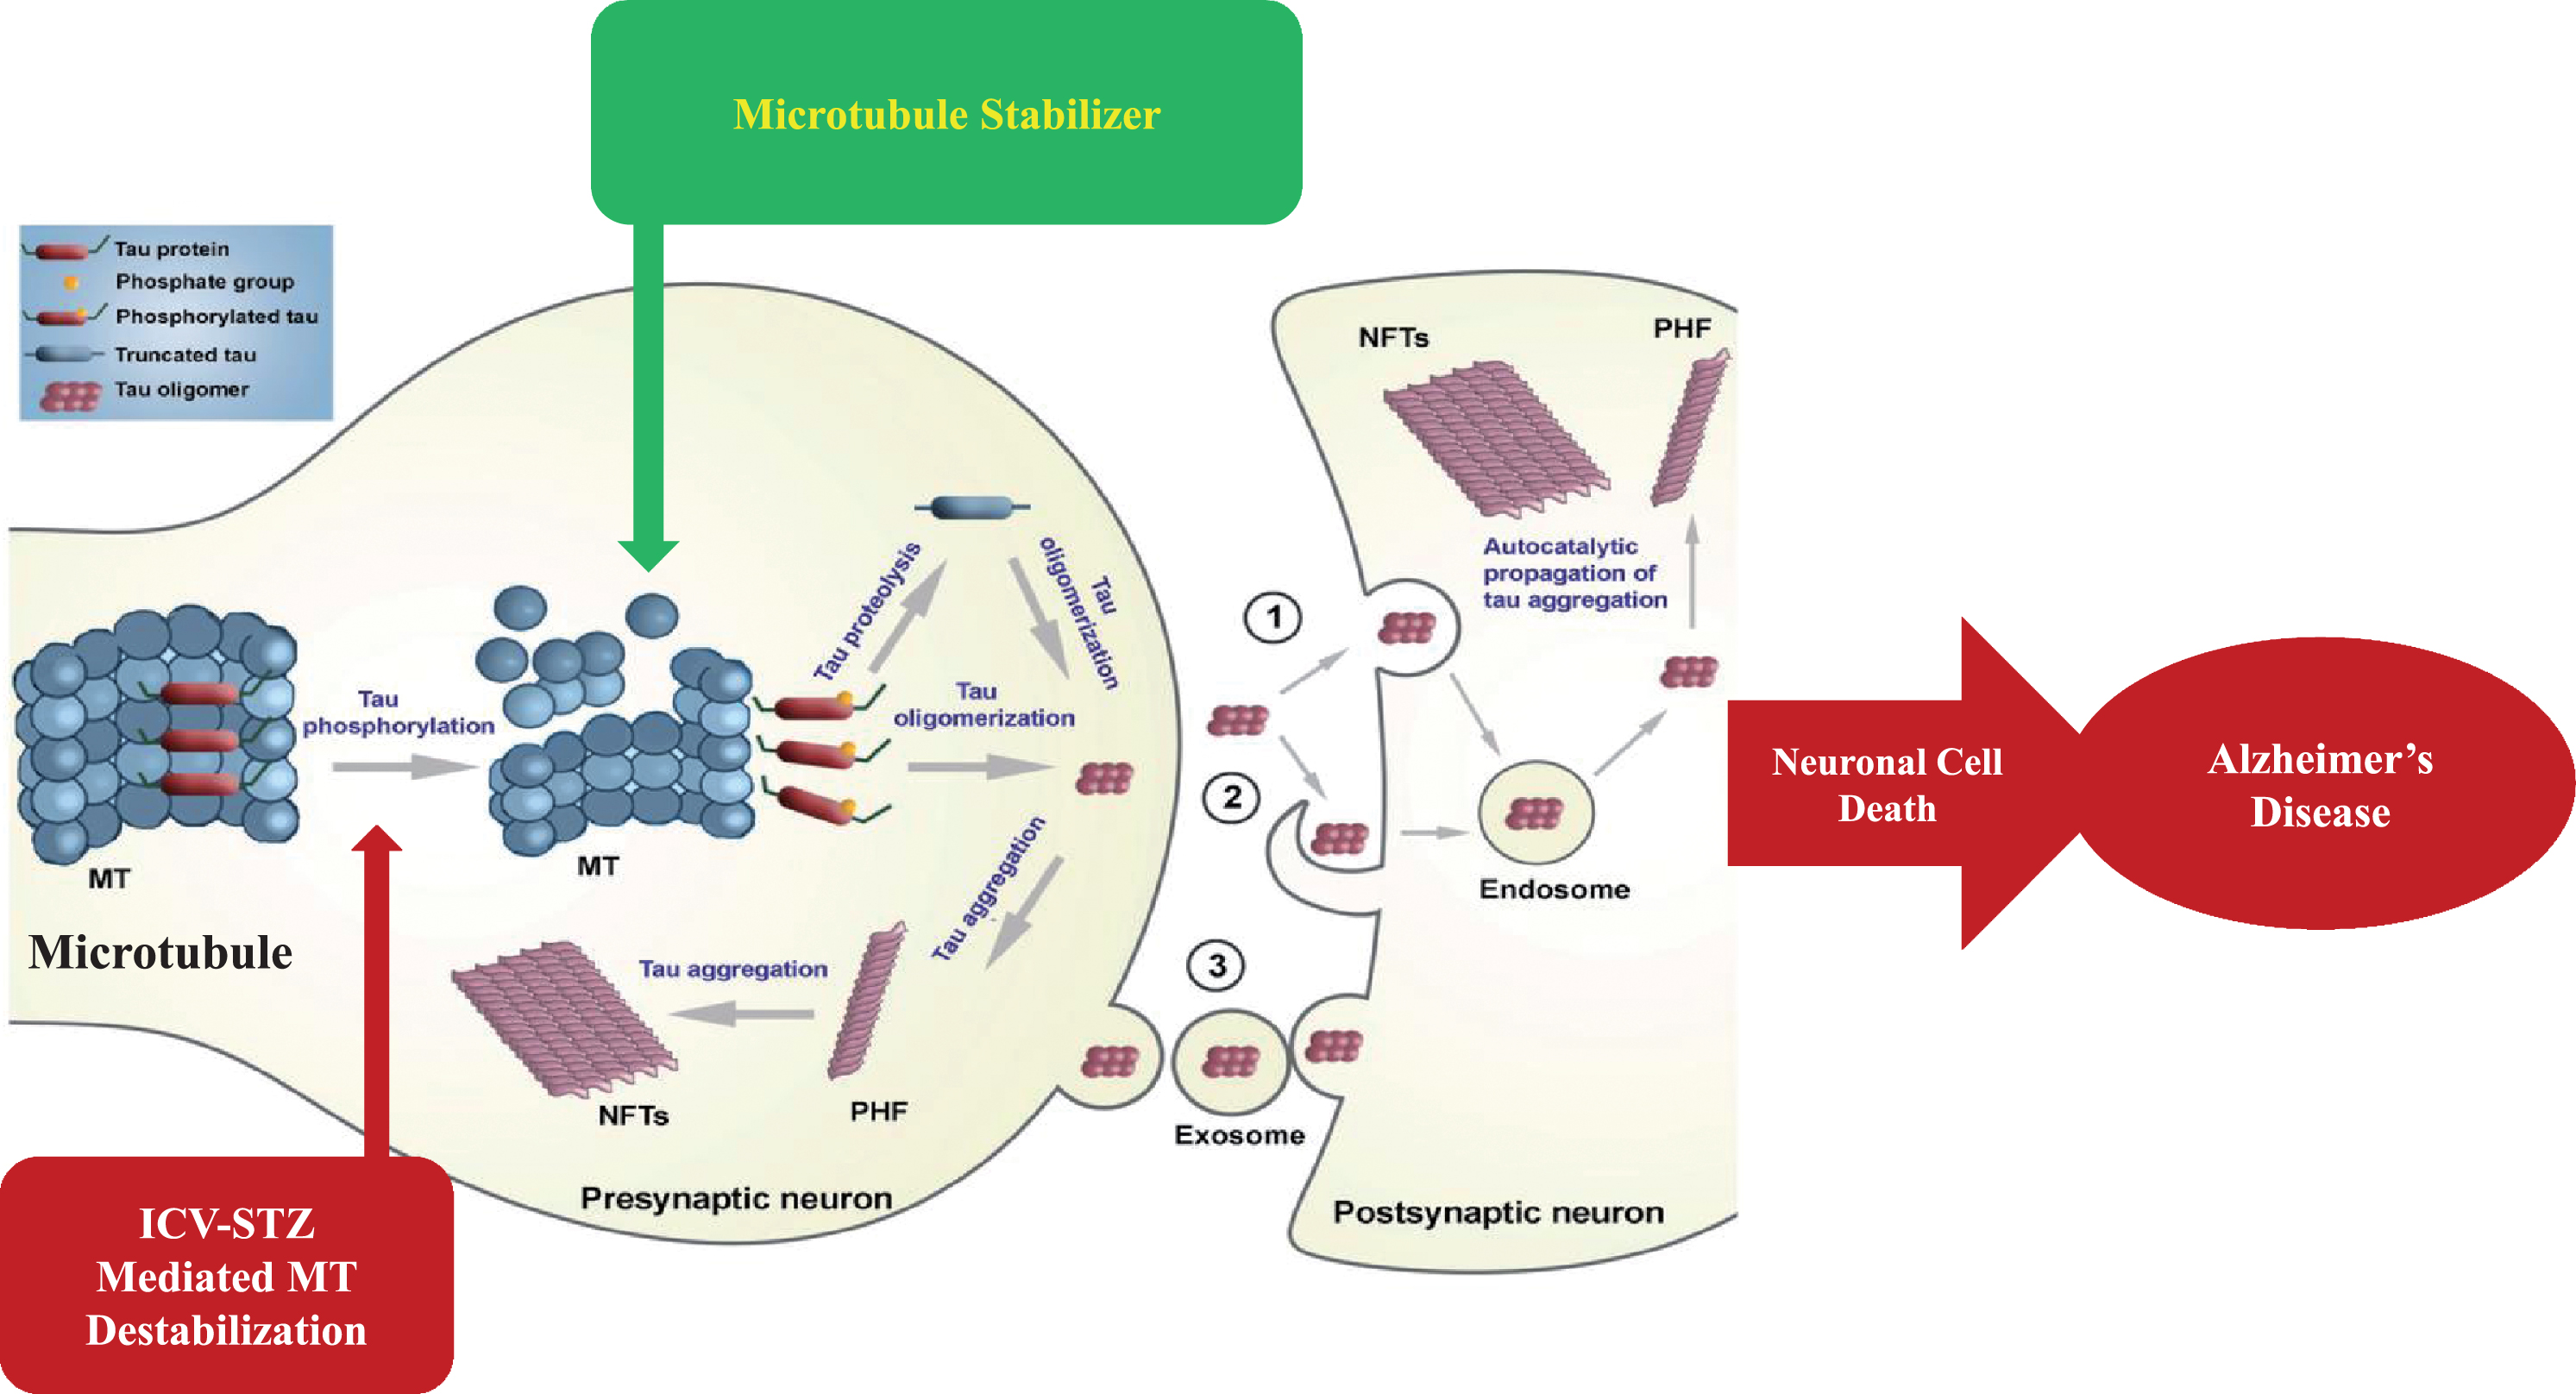 Schematic illustration of post-translational modifications of tau after inducing neurotoxin and microtubule stabilizer as plausible intervention to prevent microtubule destabilization.